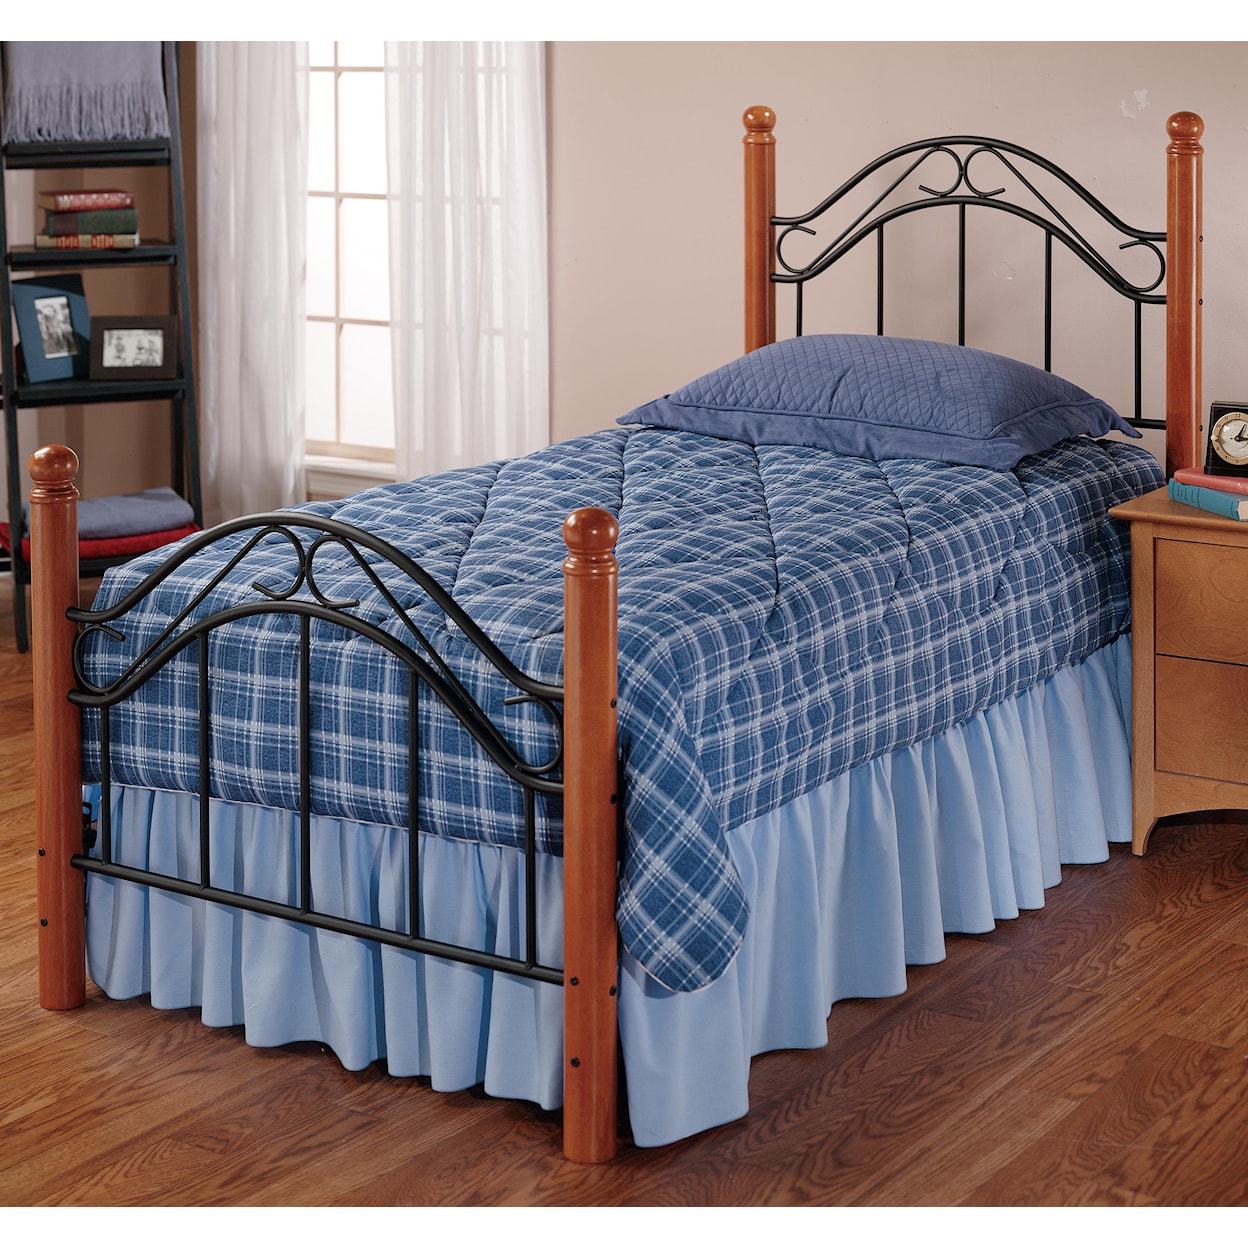 Hillsdale Wood Beds Twin Winsloh Bed